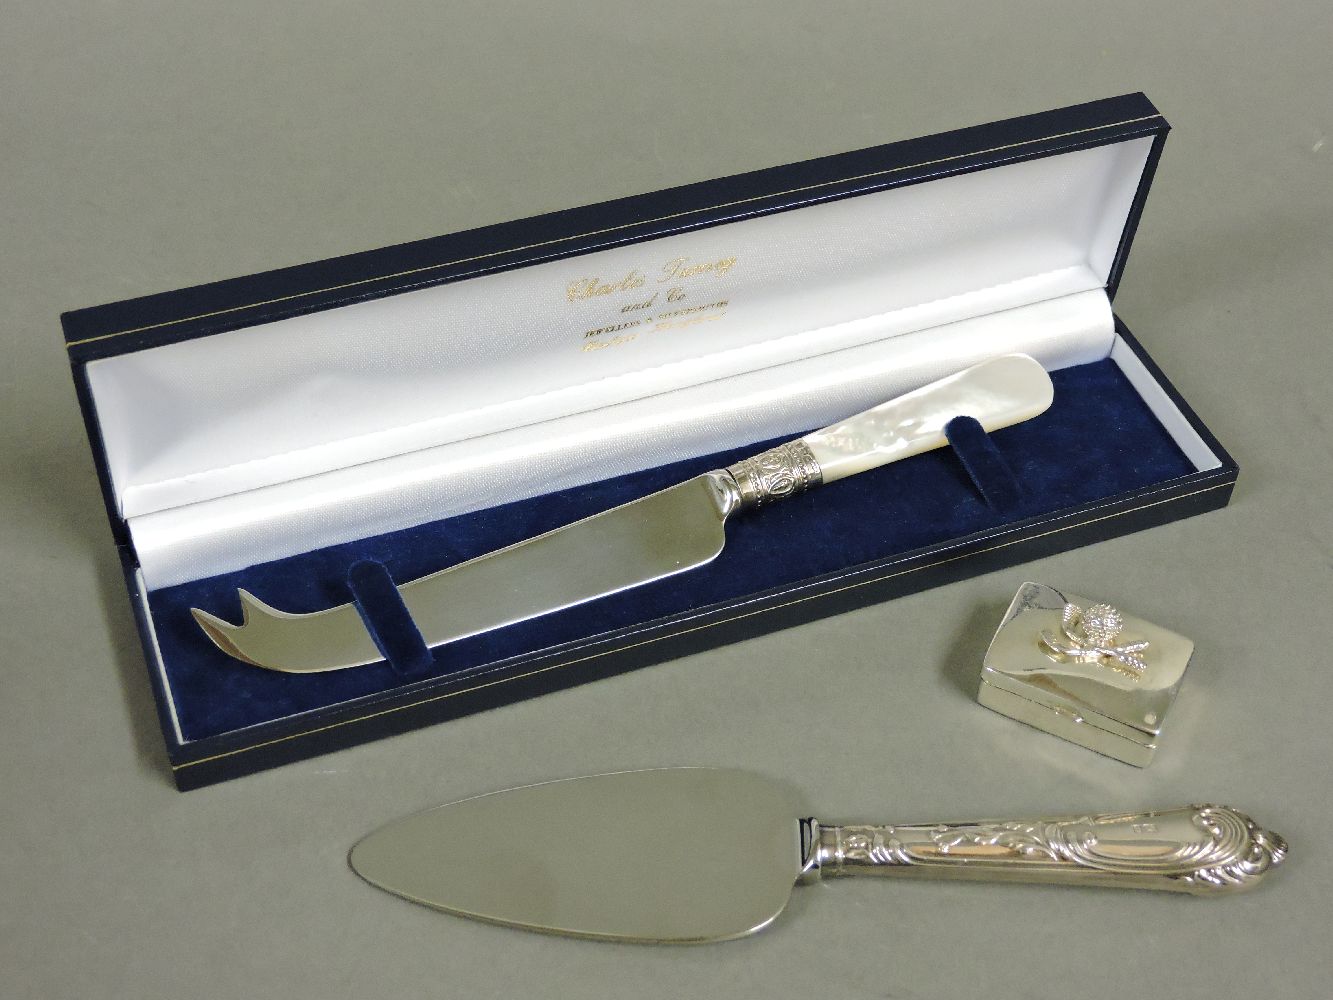 A modern boxed cheese knife, with a silver collar and mother of pearl handle, a modern cake slice